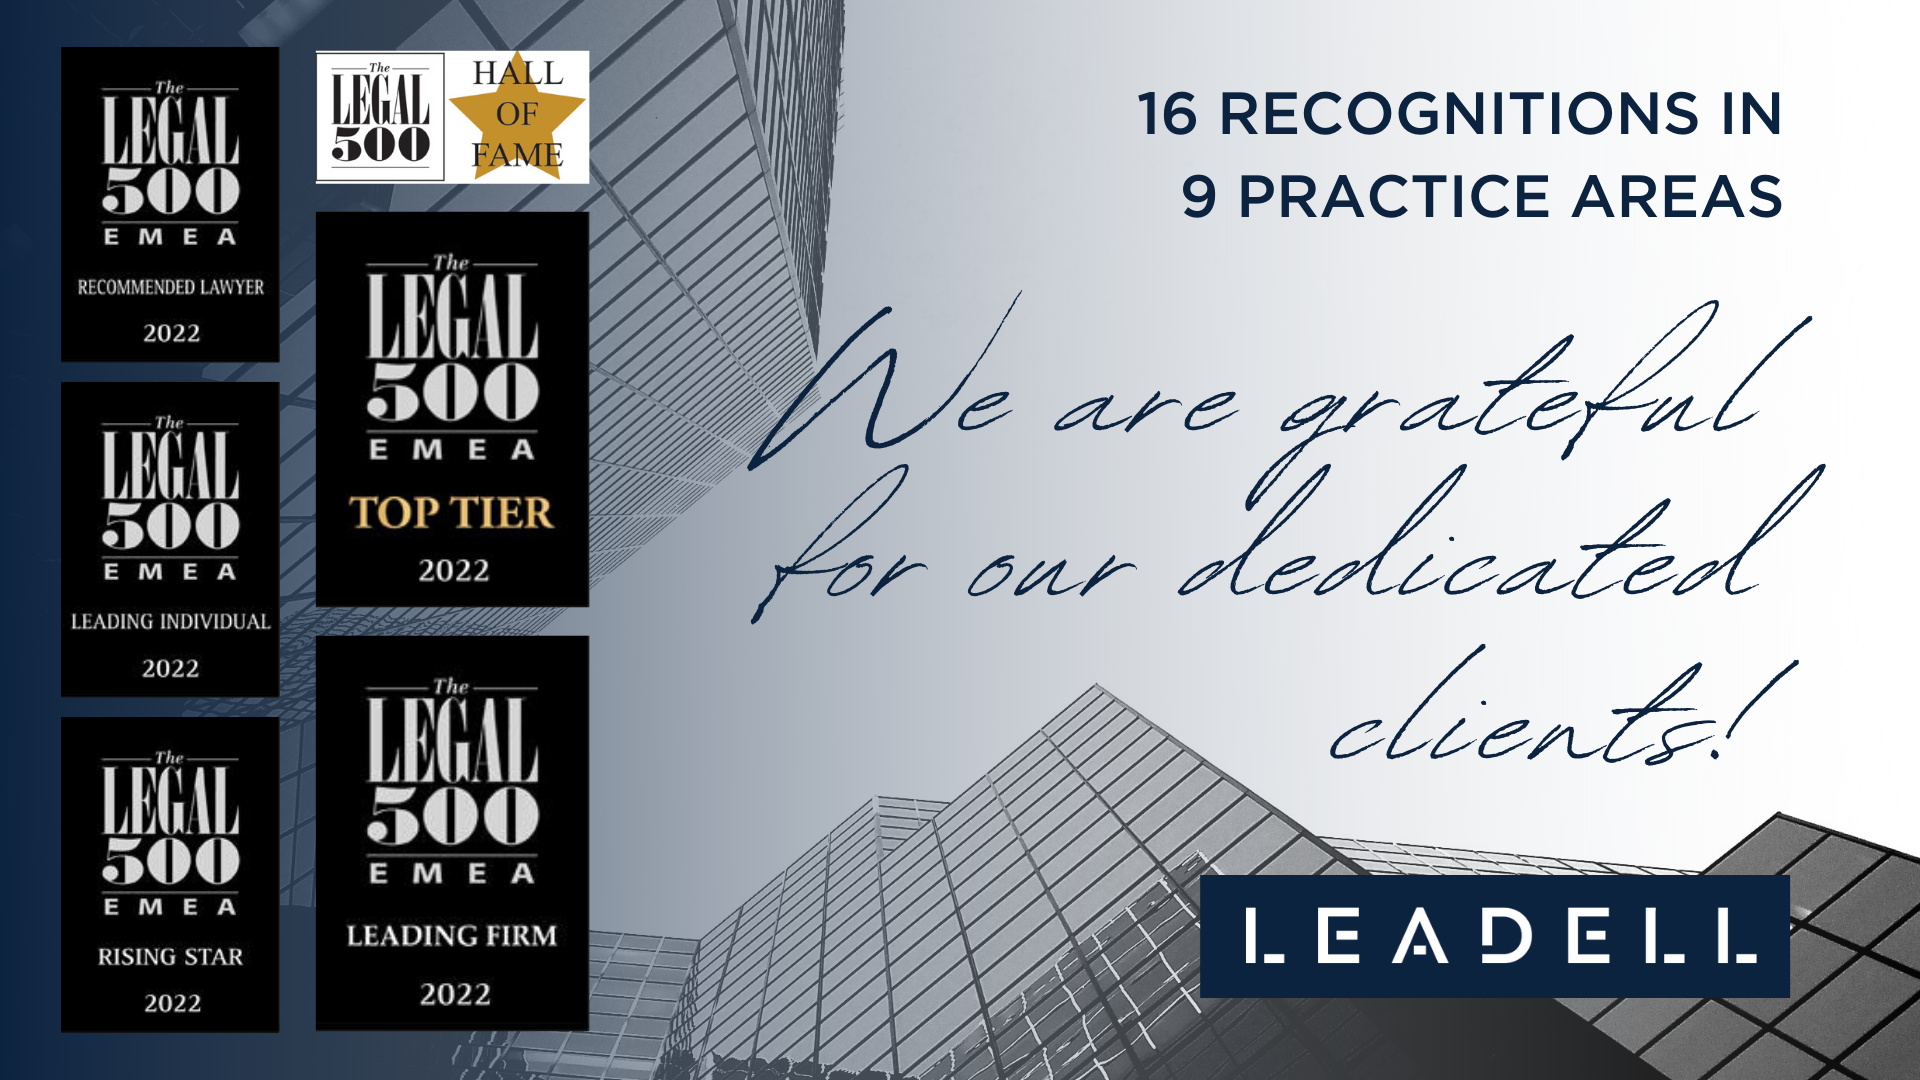 Gratitude to our clients for good feedbacks that has resulted in 16 high evalutations evaluations for LEADELL team in Baltics at the latest edition of Legal 500